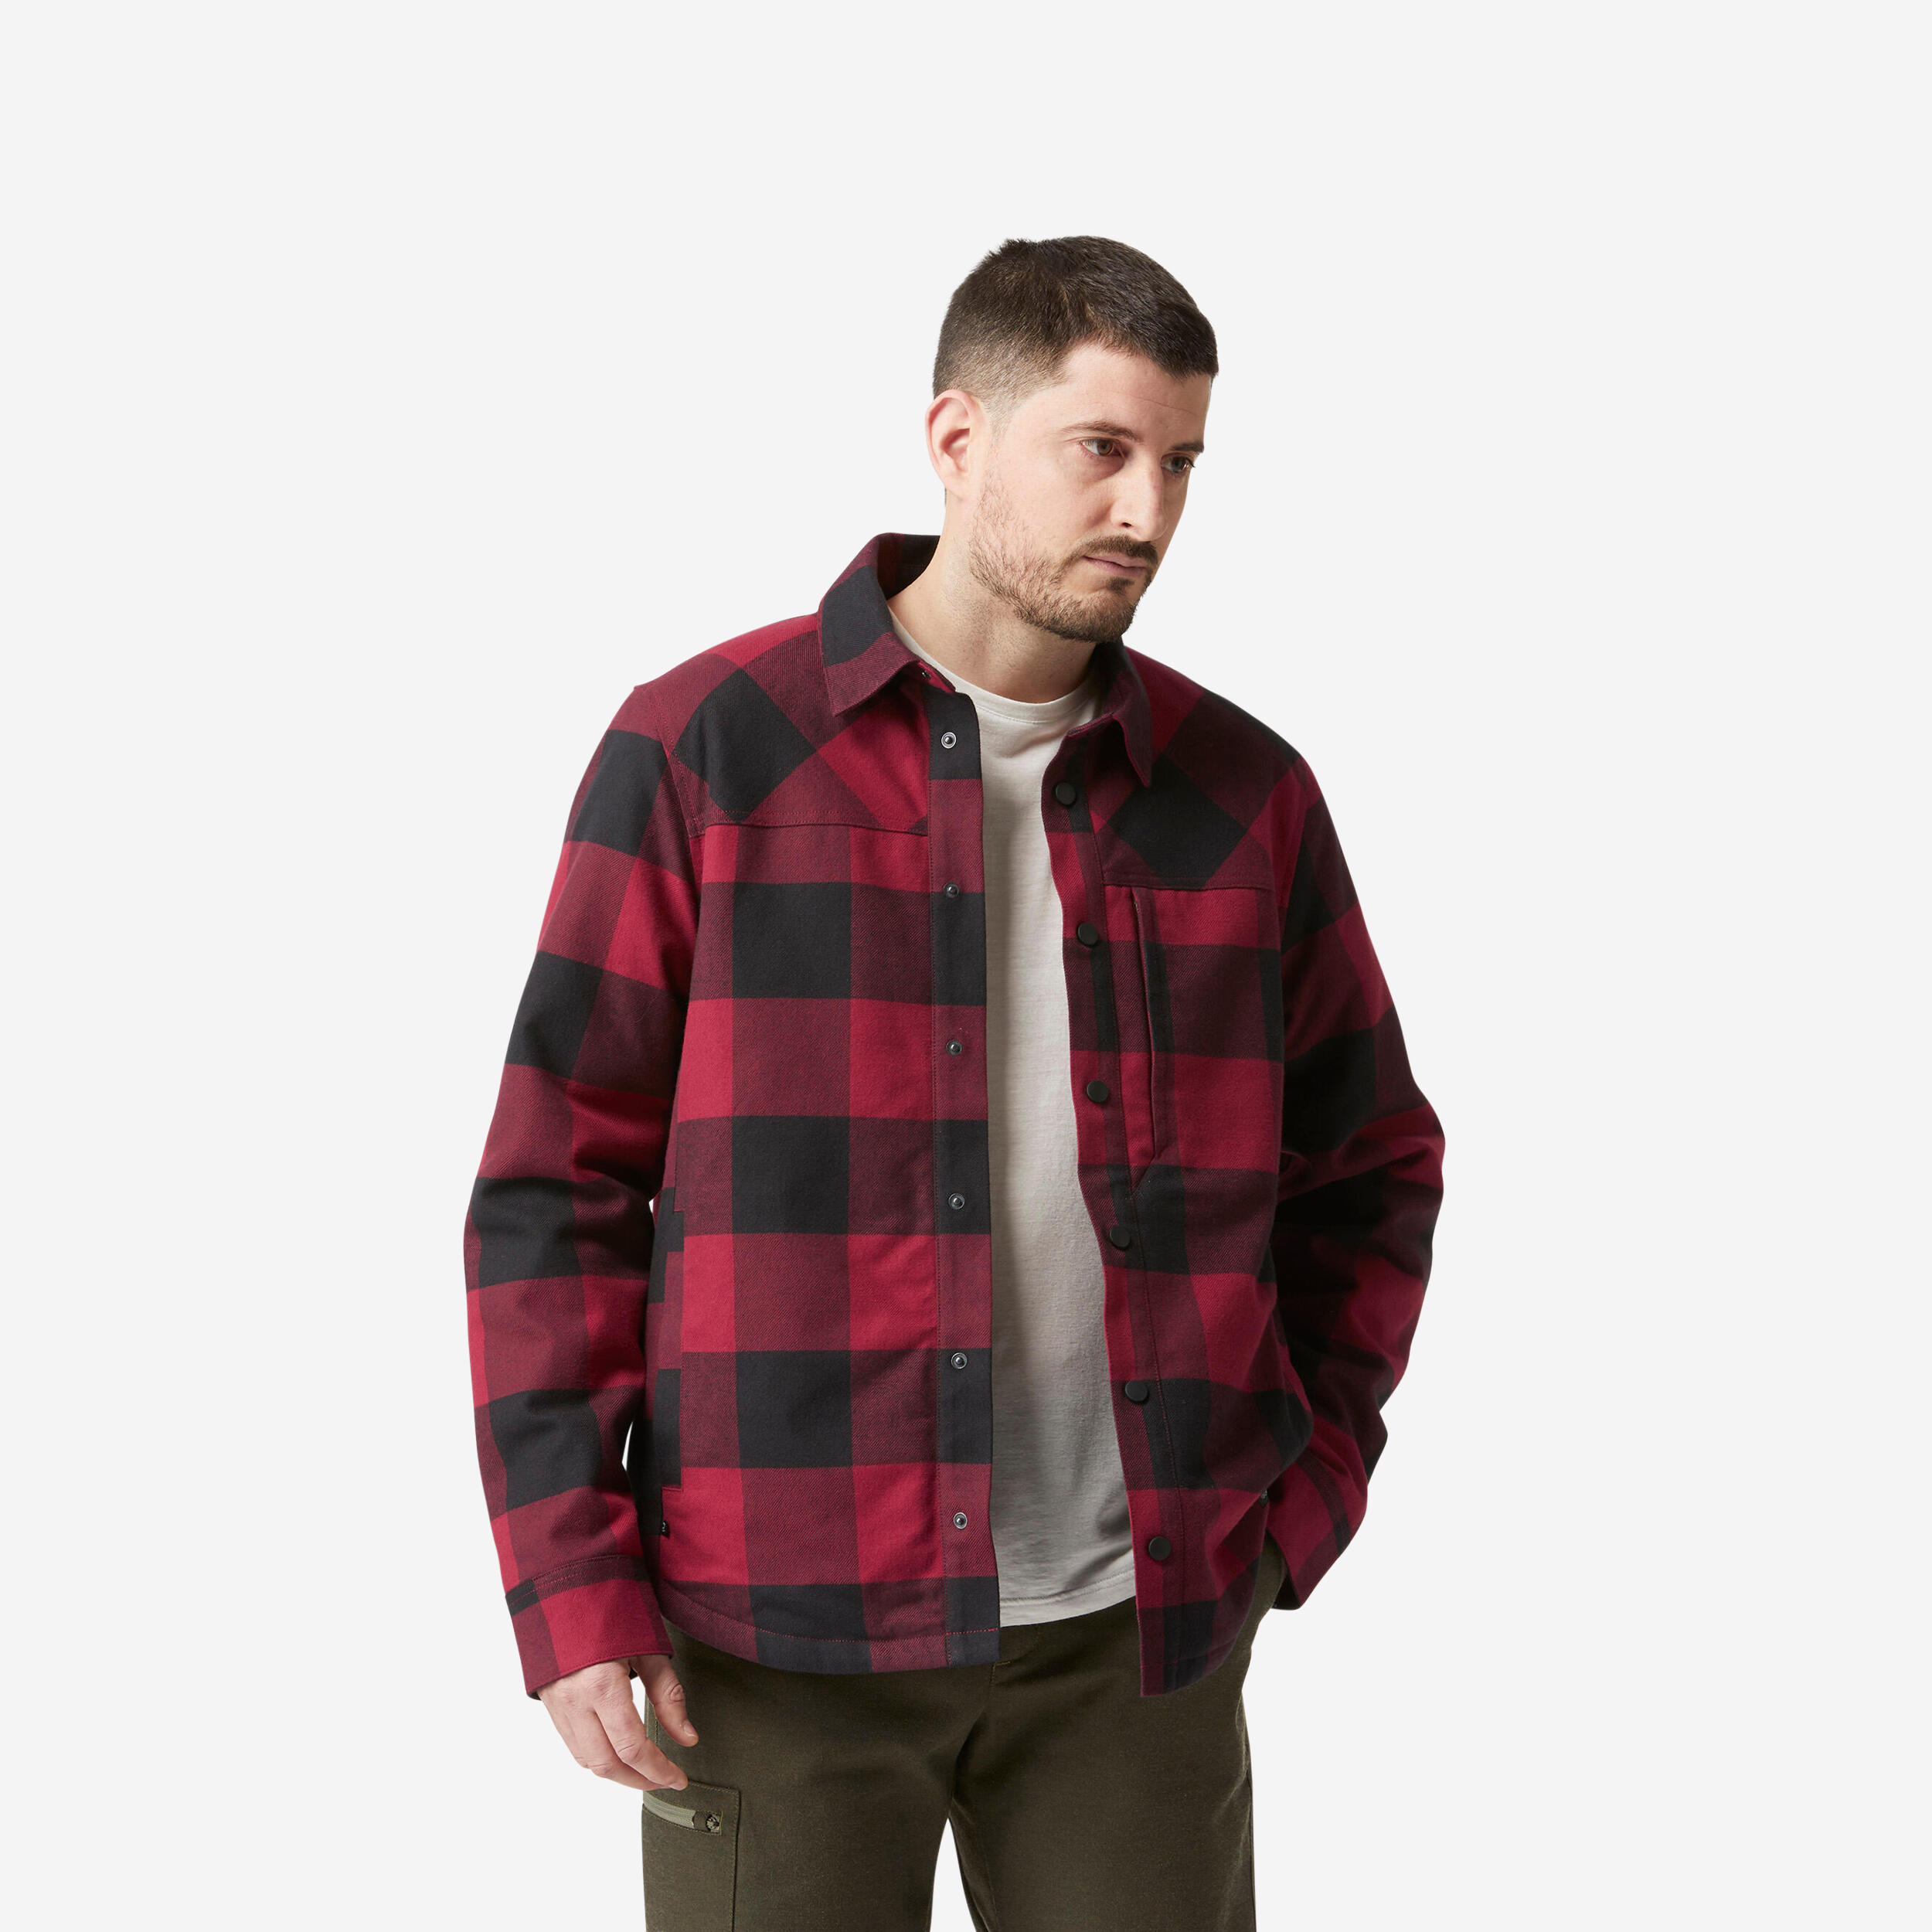 FORCLAZ TRAVEL 900 overshirt red